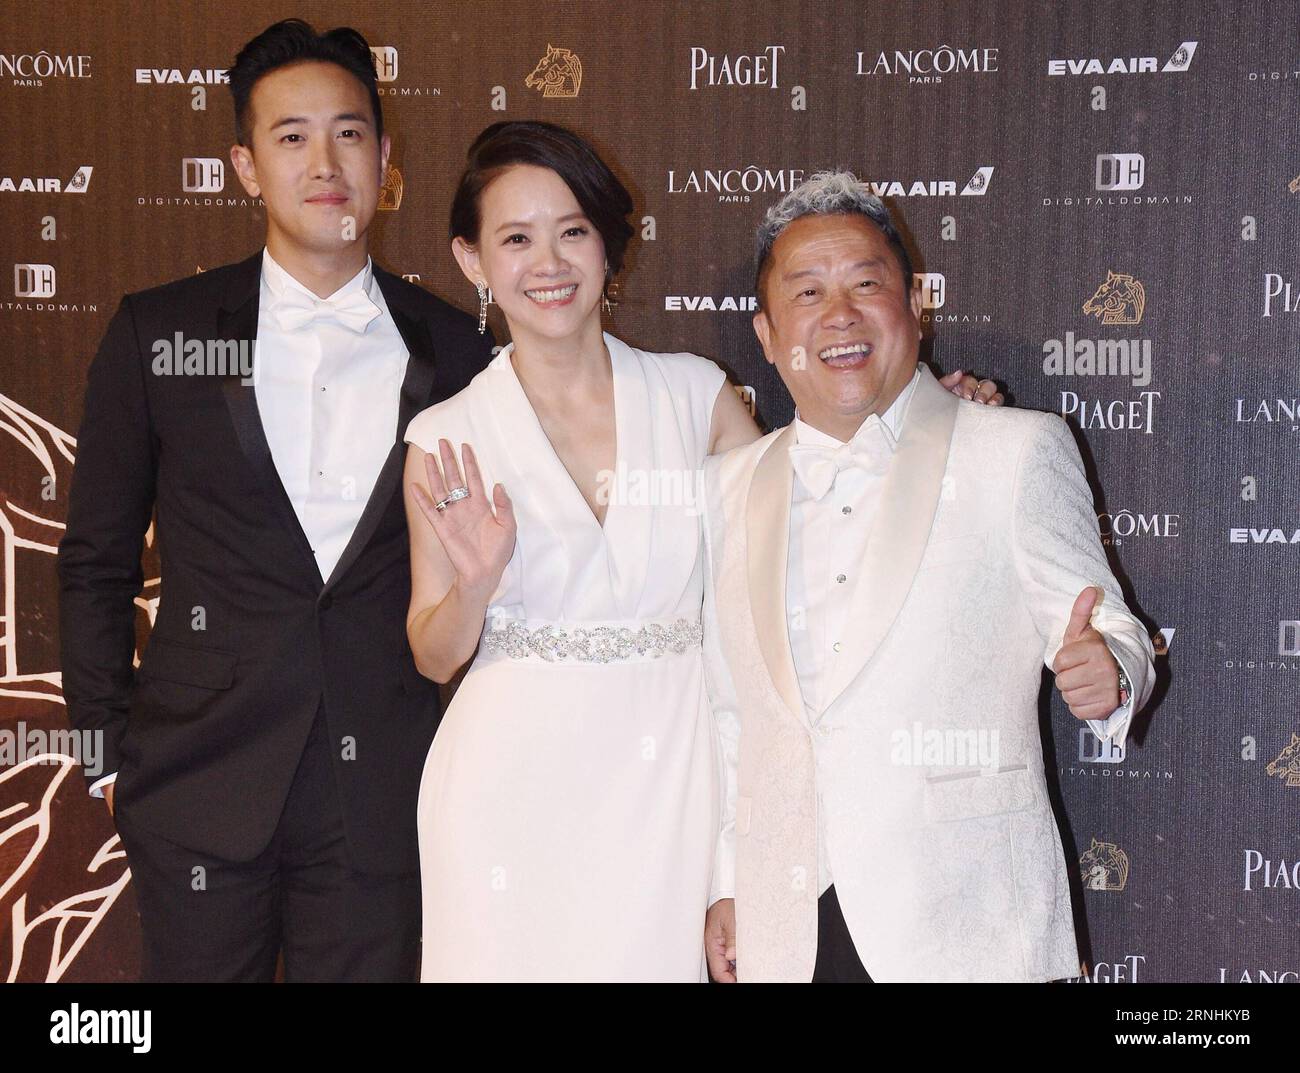 (161127) -- TAIPEI, Nov. 27, 2016 () -- (R-L) Eric Tsang, Bowie Tsang and Derek Tsang arrive for the awarding ceremony of the 53rd Golden Horse Awards in Taipei, southeast China s Taiwan, Nov. 26, 2016. The event was held here on Saturday. () (wf) CHINA-TAIPEI-GOLDEN HORSE AWARDS (CN) Xinhua PUBLICATIONxNOTxINxCHN   Taipei Nov 27 2016 r l Eric Tsang Bowie Tsang and Derek Tsang Arrive for The awarding Ceremony of The 53rd Golden Horse Awards in Taipei South East China S TAIWAN Nov 26 2016 The Event what Hero Here ON Saturday WF China Taipei Golden Horse Awards CN XINHUA PUBLICATIONxNOTxINxCHN Stock Photo